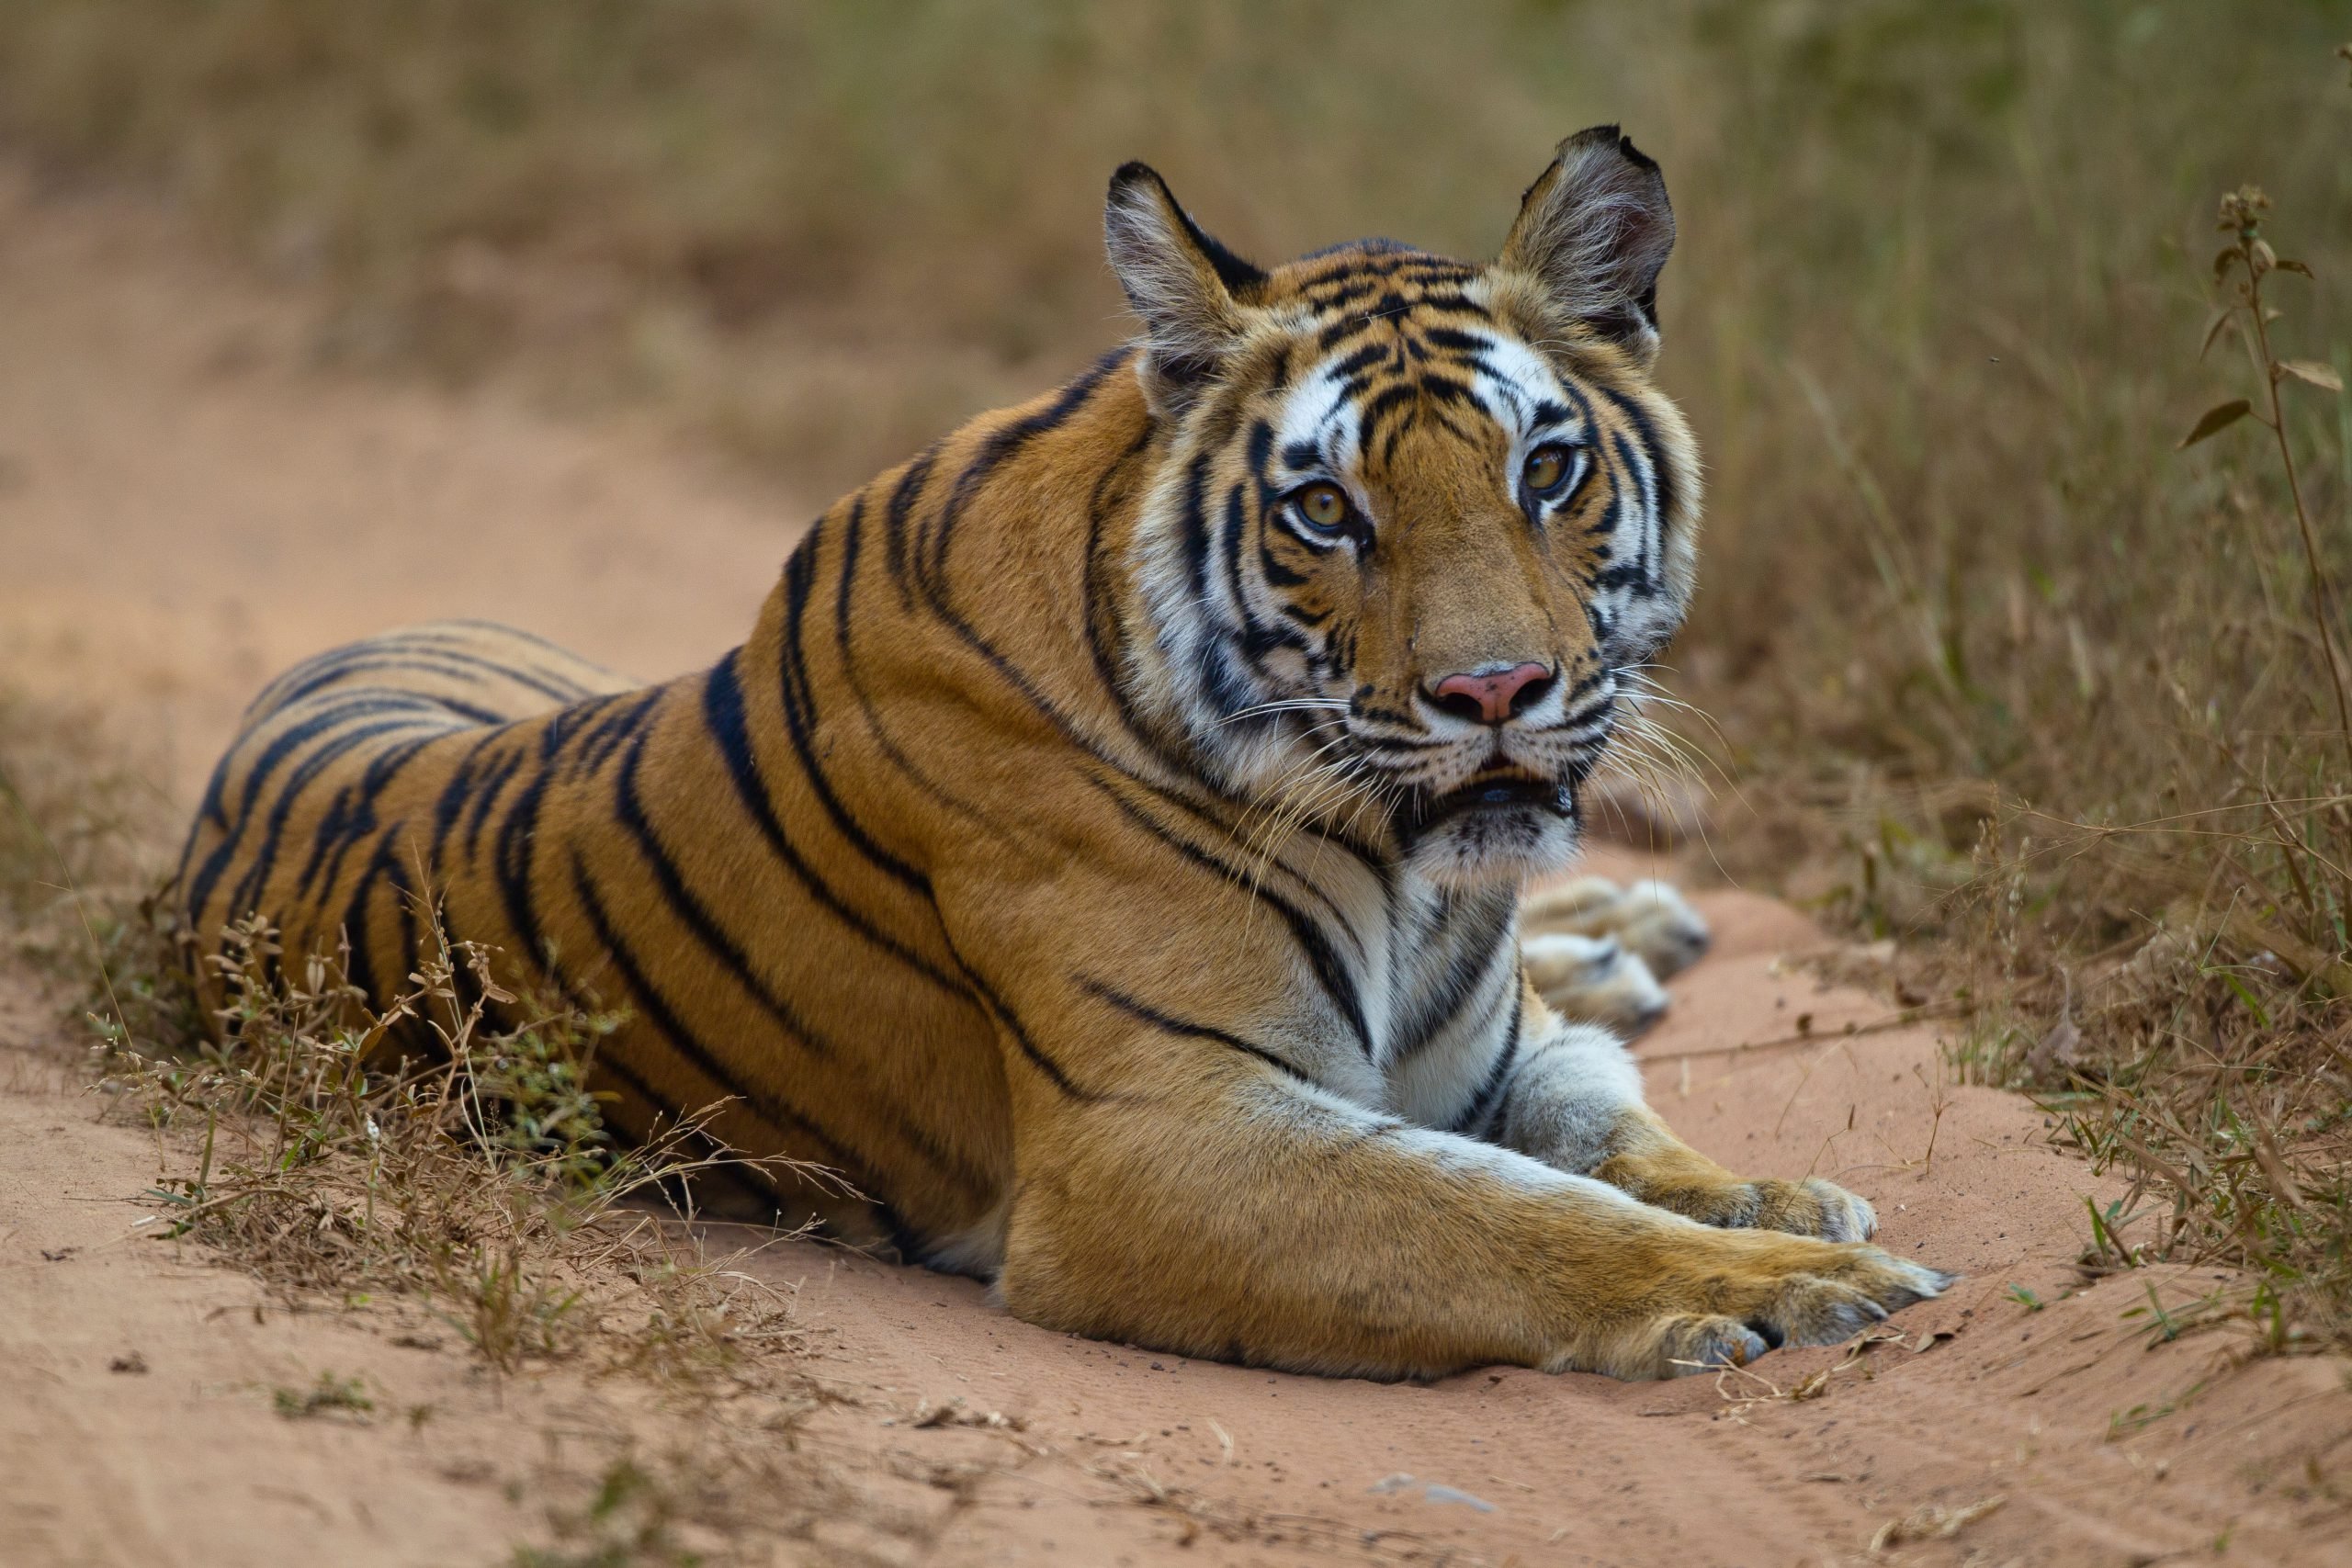 <p>A wild Bengal tiger [Image by: Mark Smith/Alamy]</p>